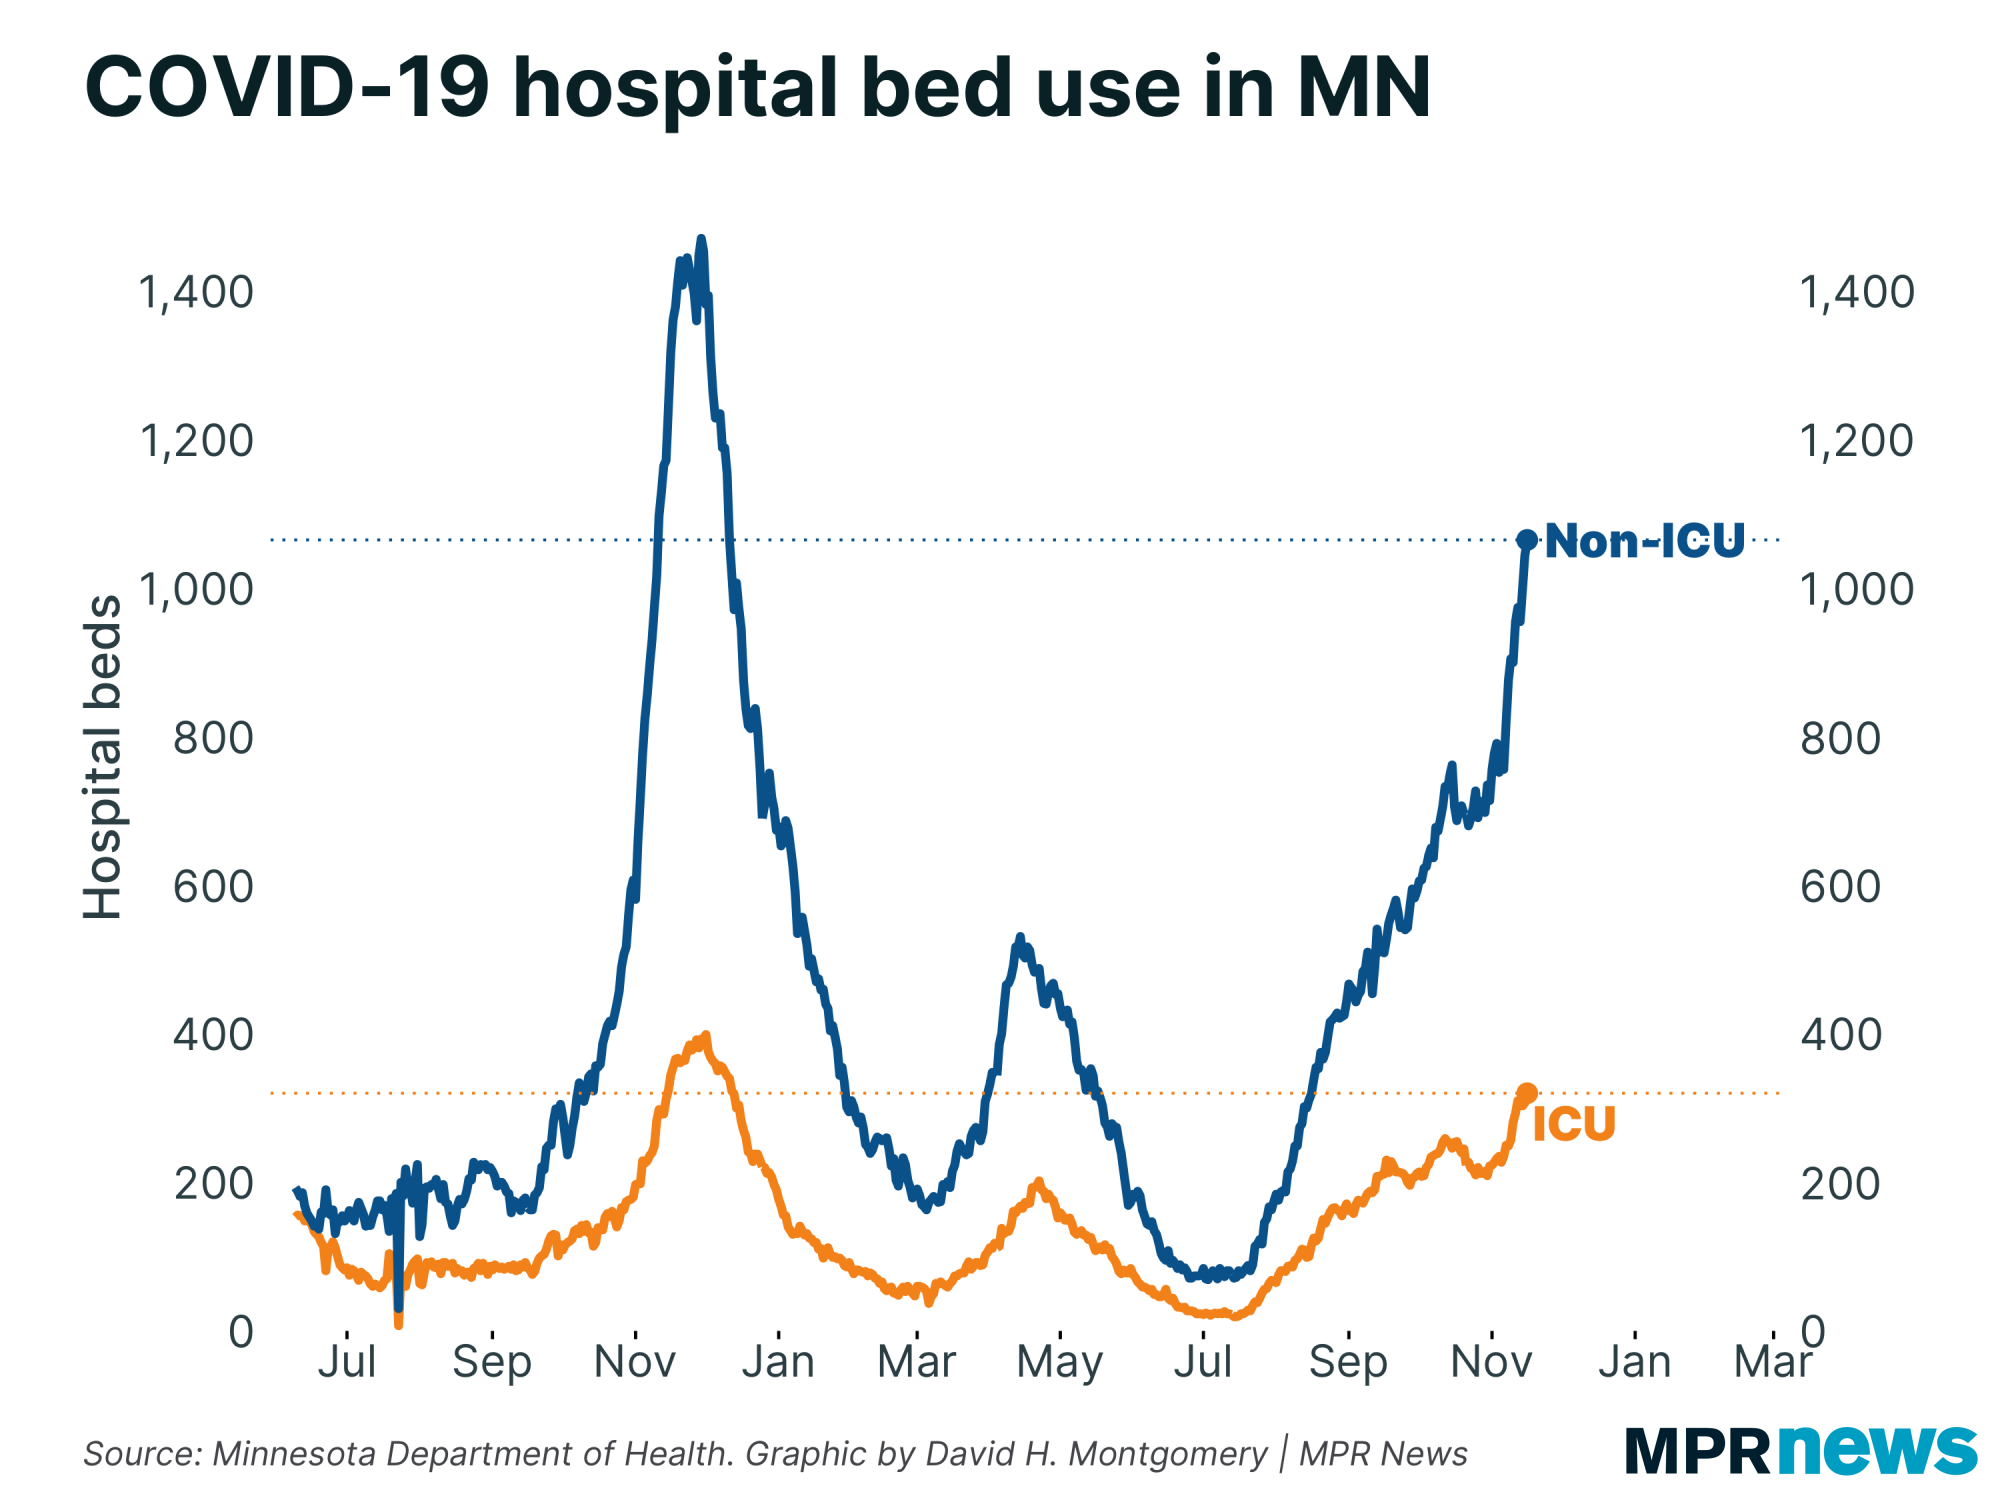 Graph of Minnesota's COVID-19 hospital bed use